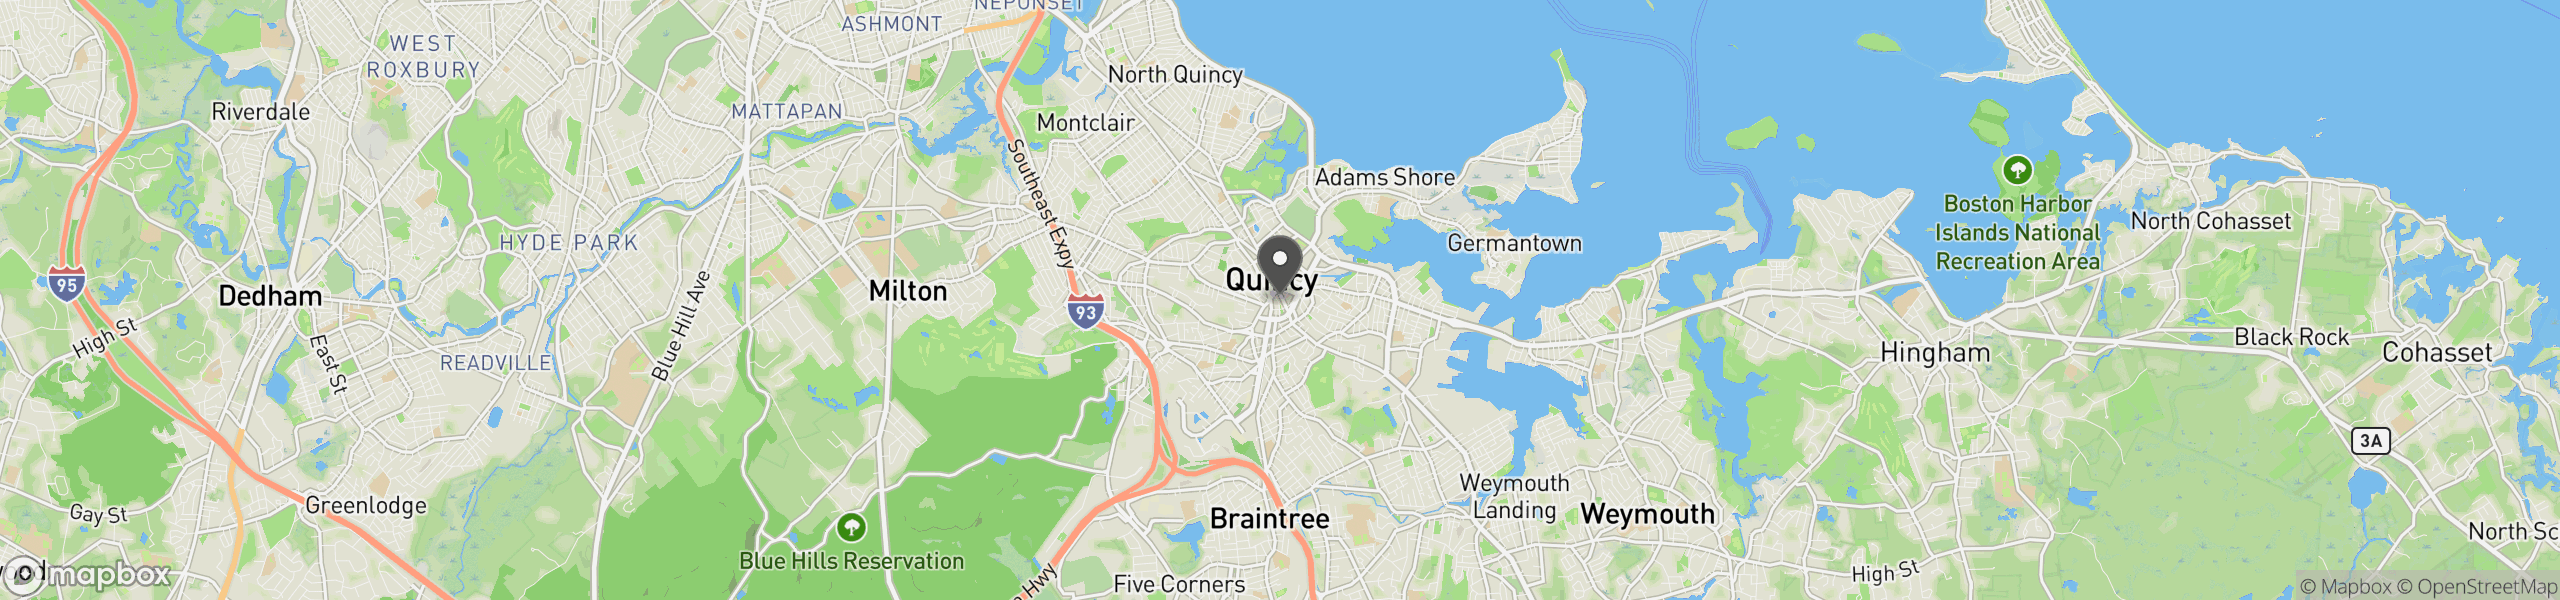 Quincy, MA 02169